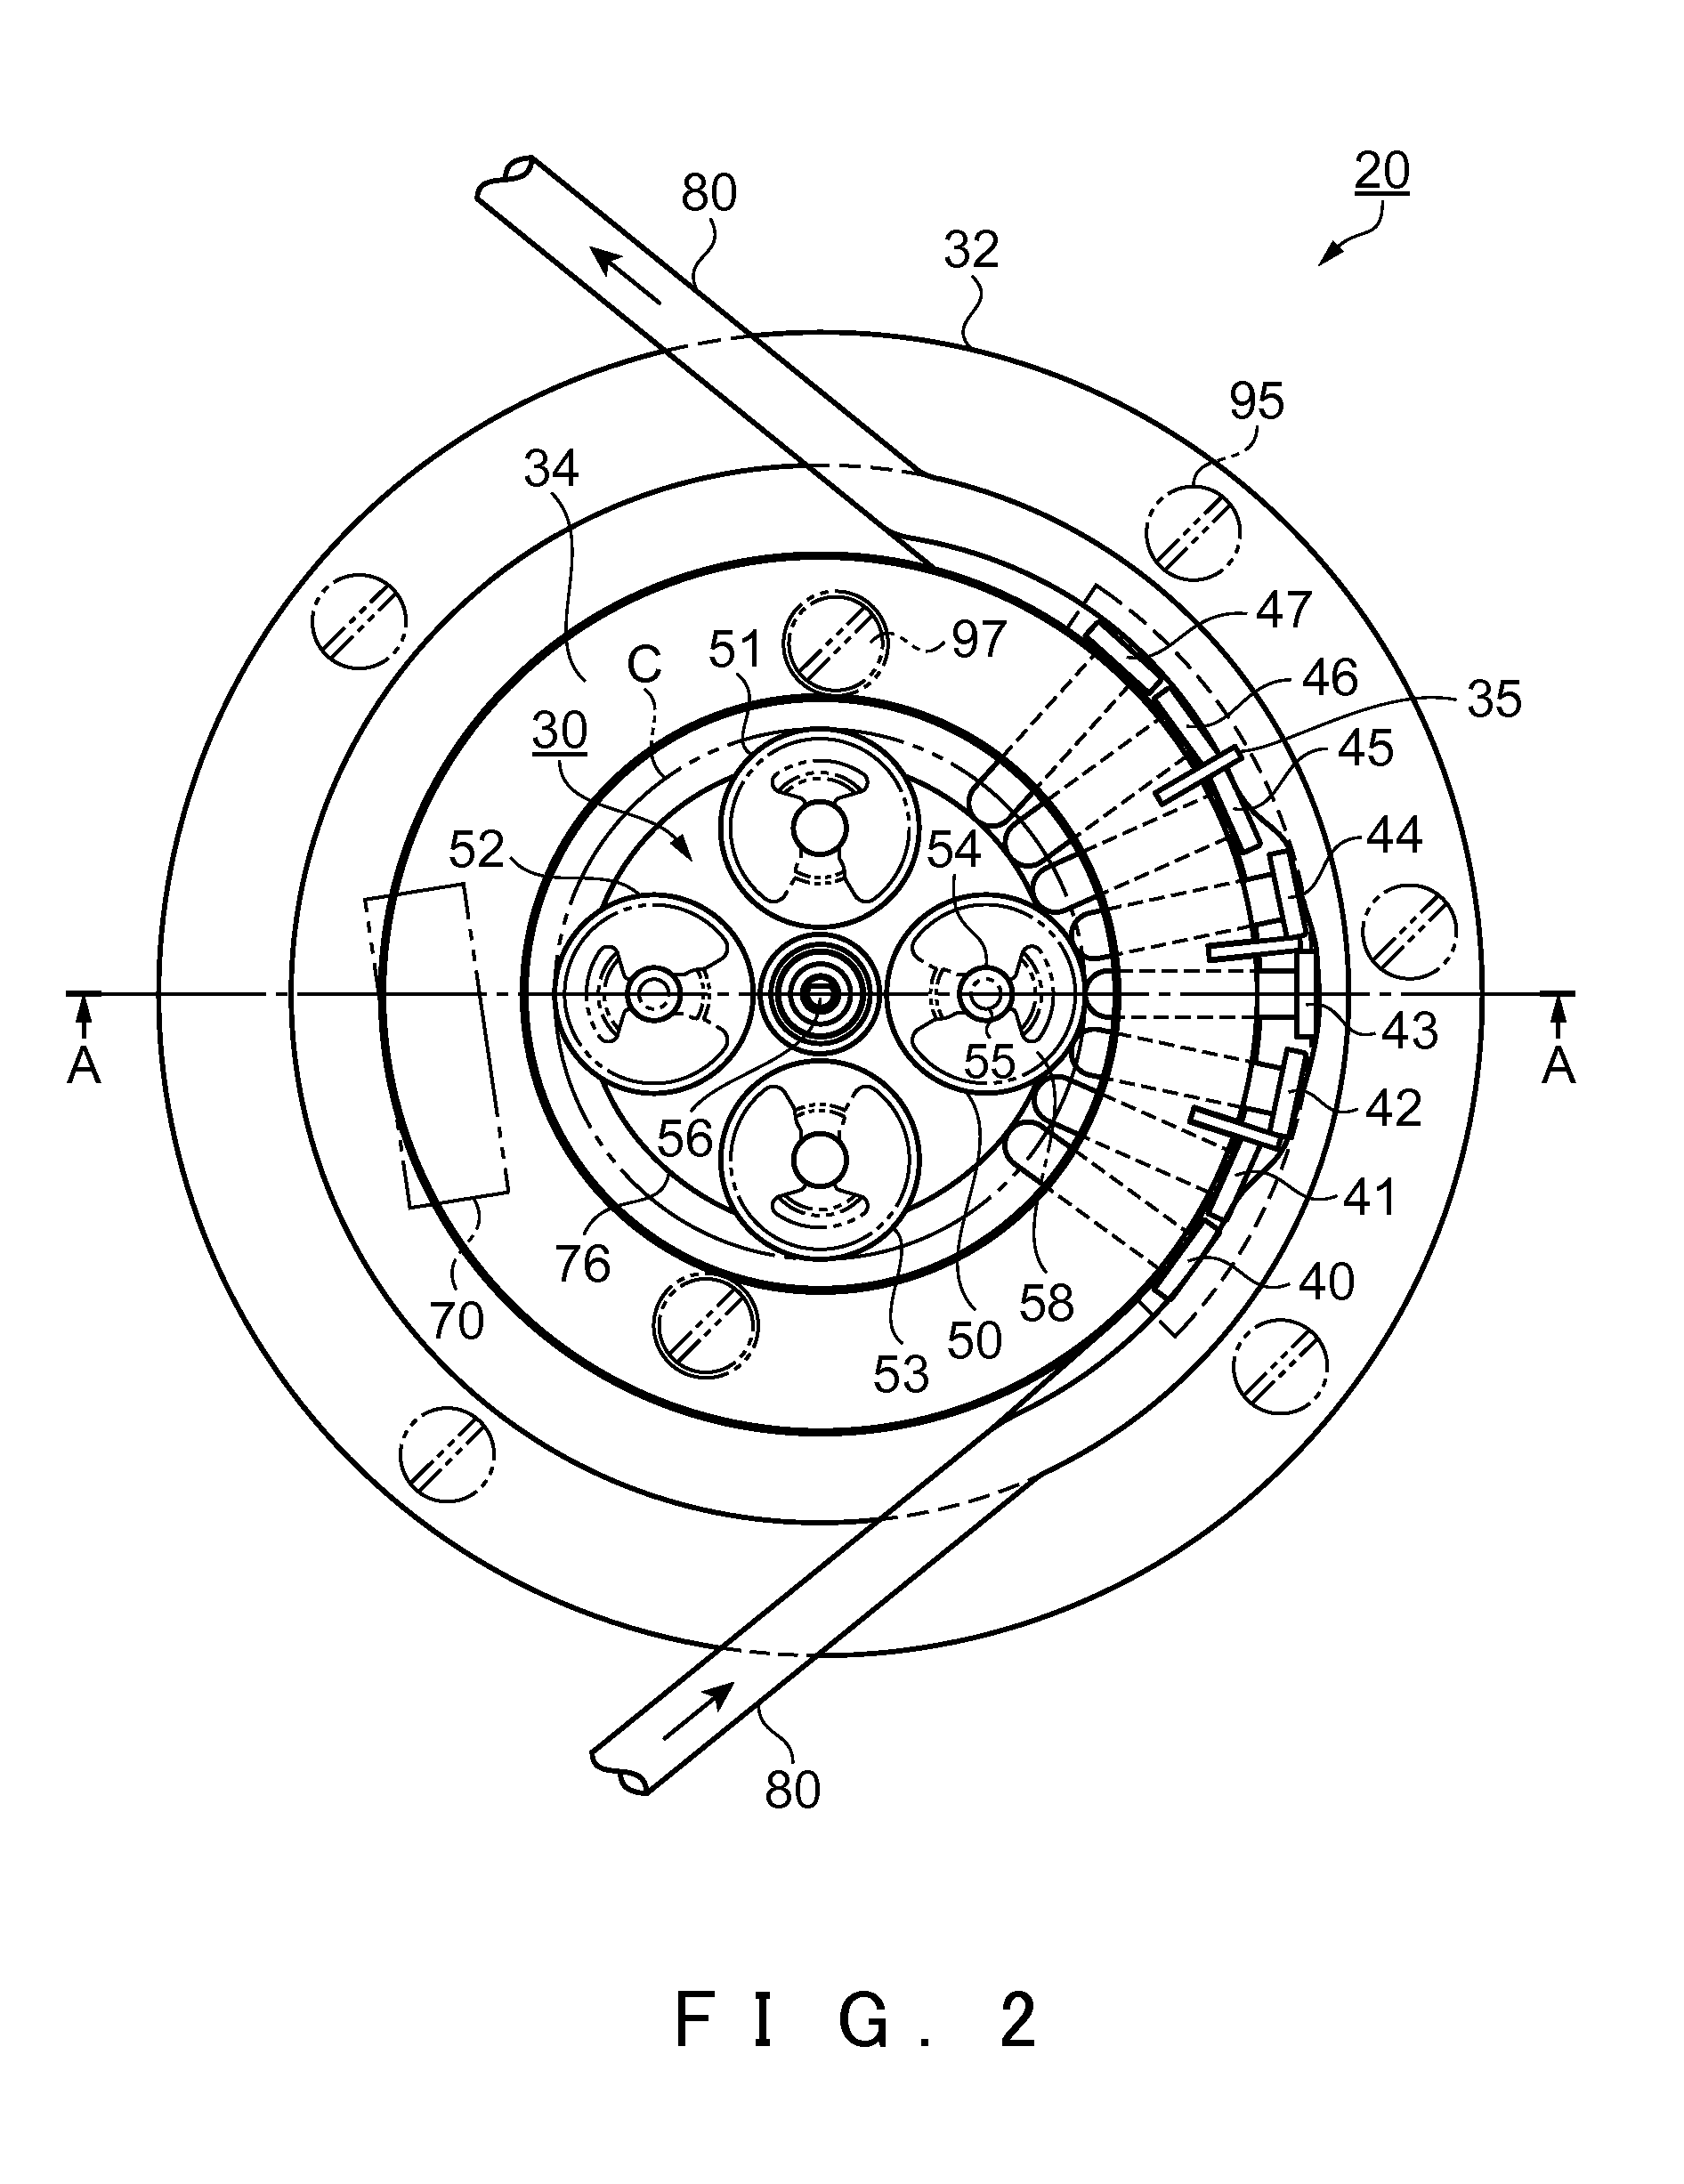 Fluid transporting device, and fluid transporter